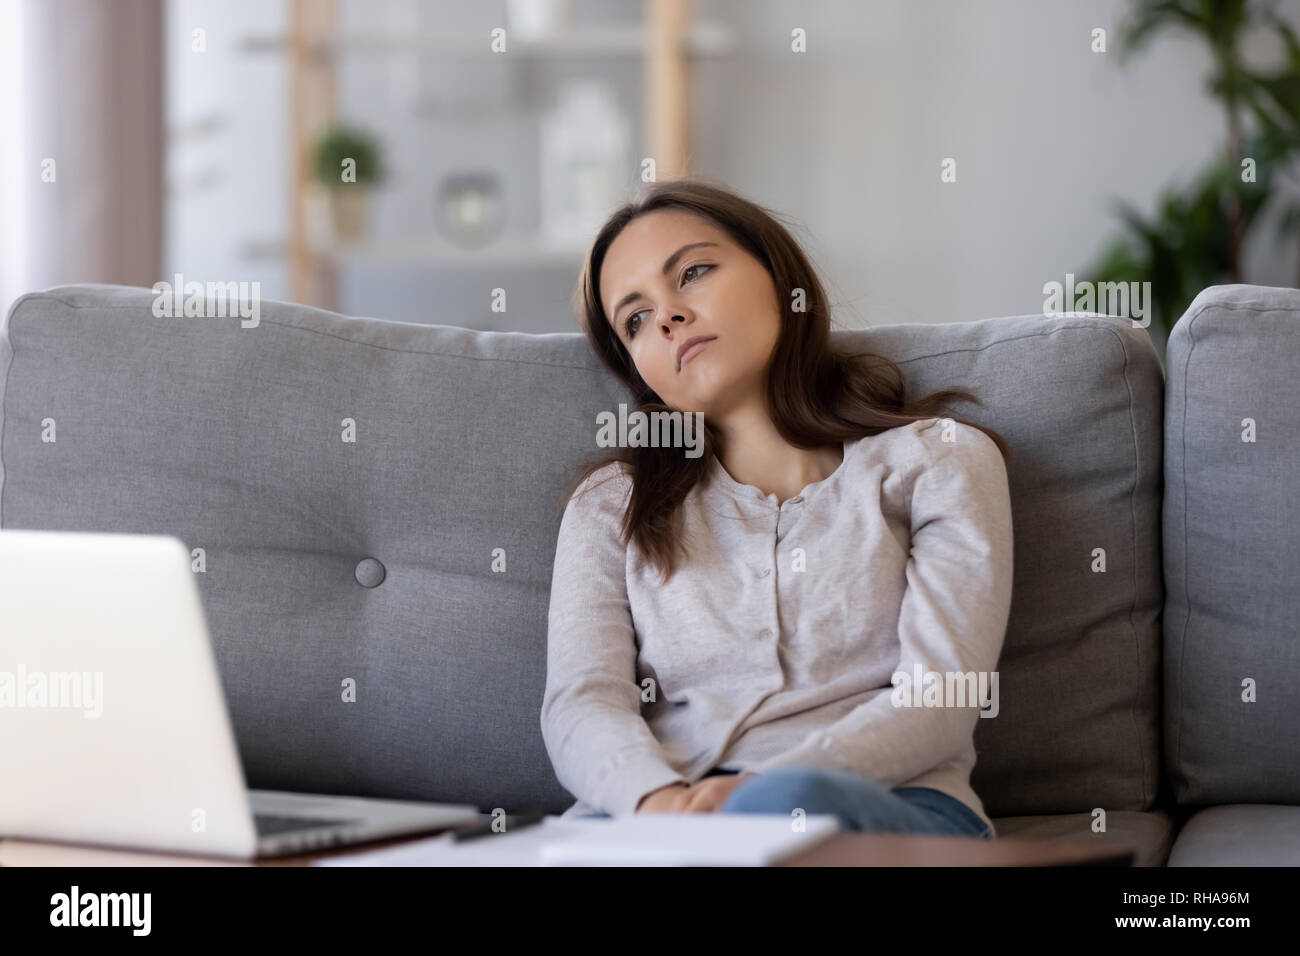 Tired apathetic teenager looking away sitting on couch feeling demotivated Stock Photo